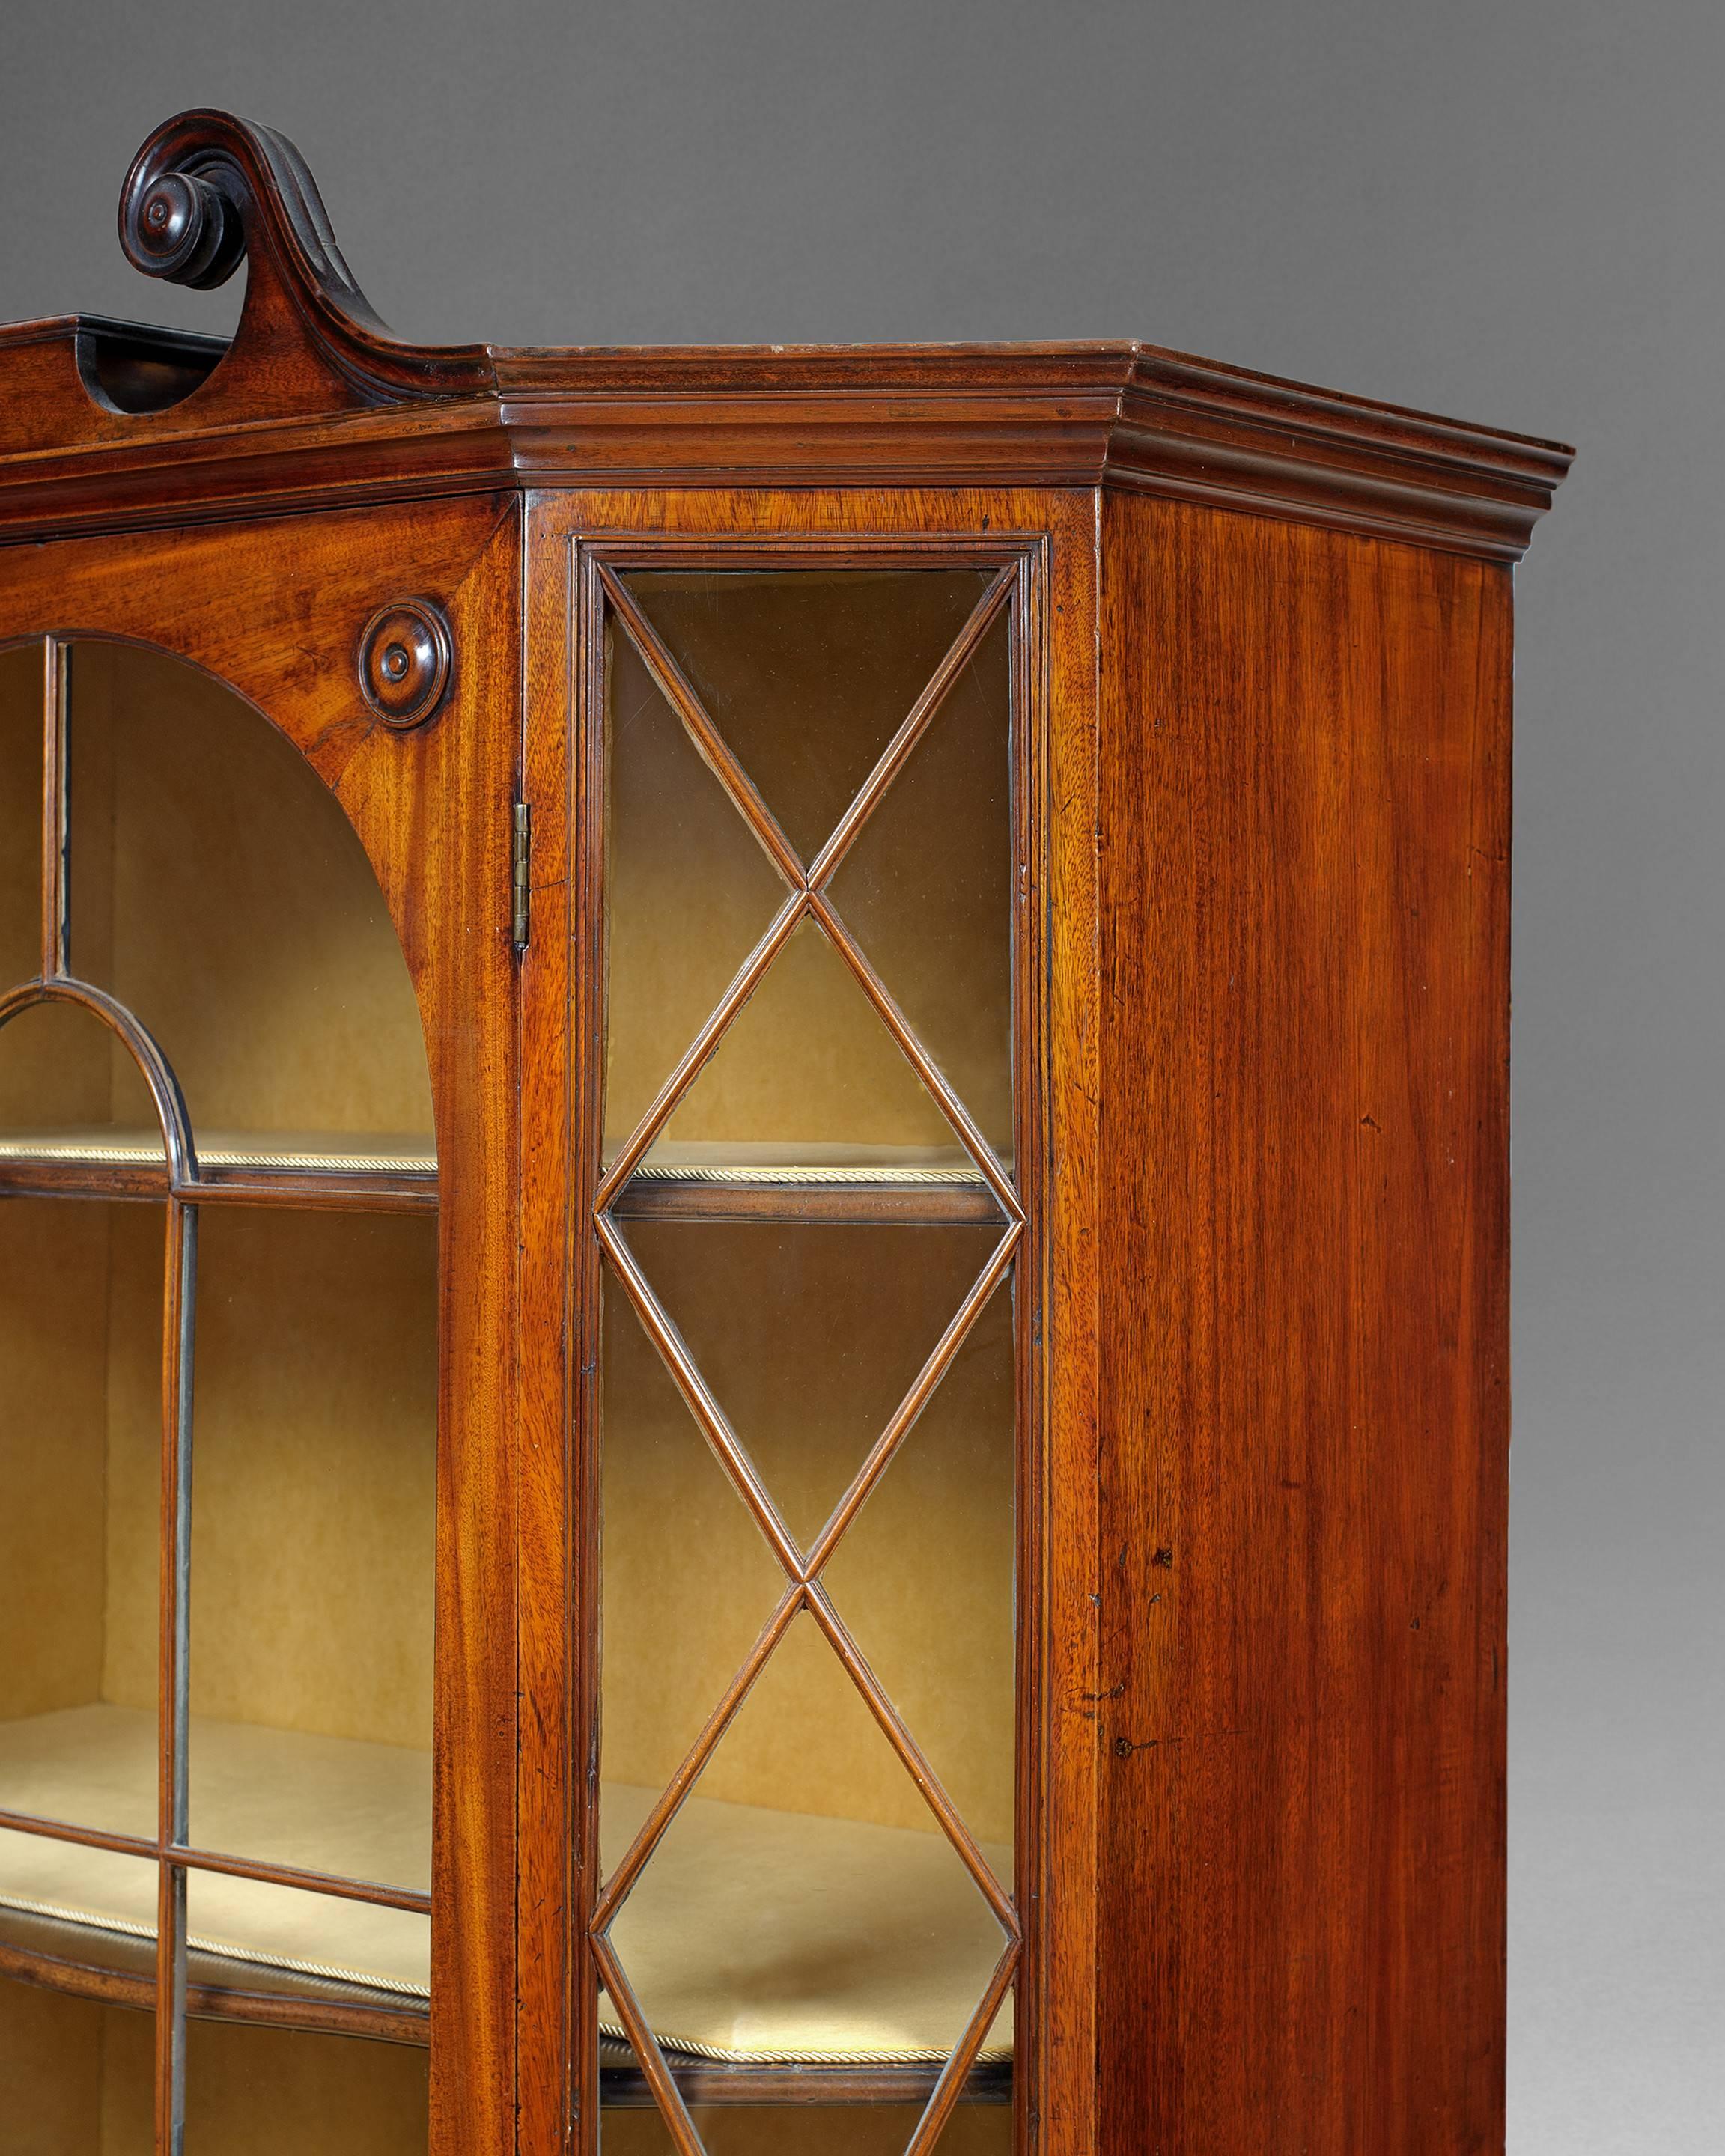 An important George III period mahogany hexagonal display cabinet, the top with a scrolling swan necked pediment above the stepped, moulded cornice, the upper part with a central glazed Venetian window door with arched astragal glazing bars and